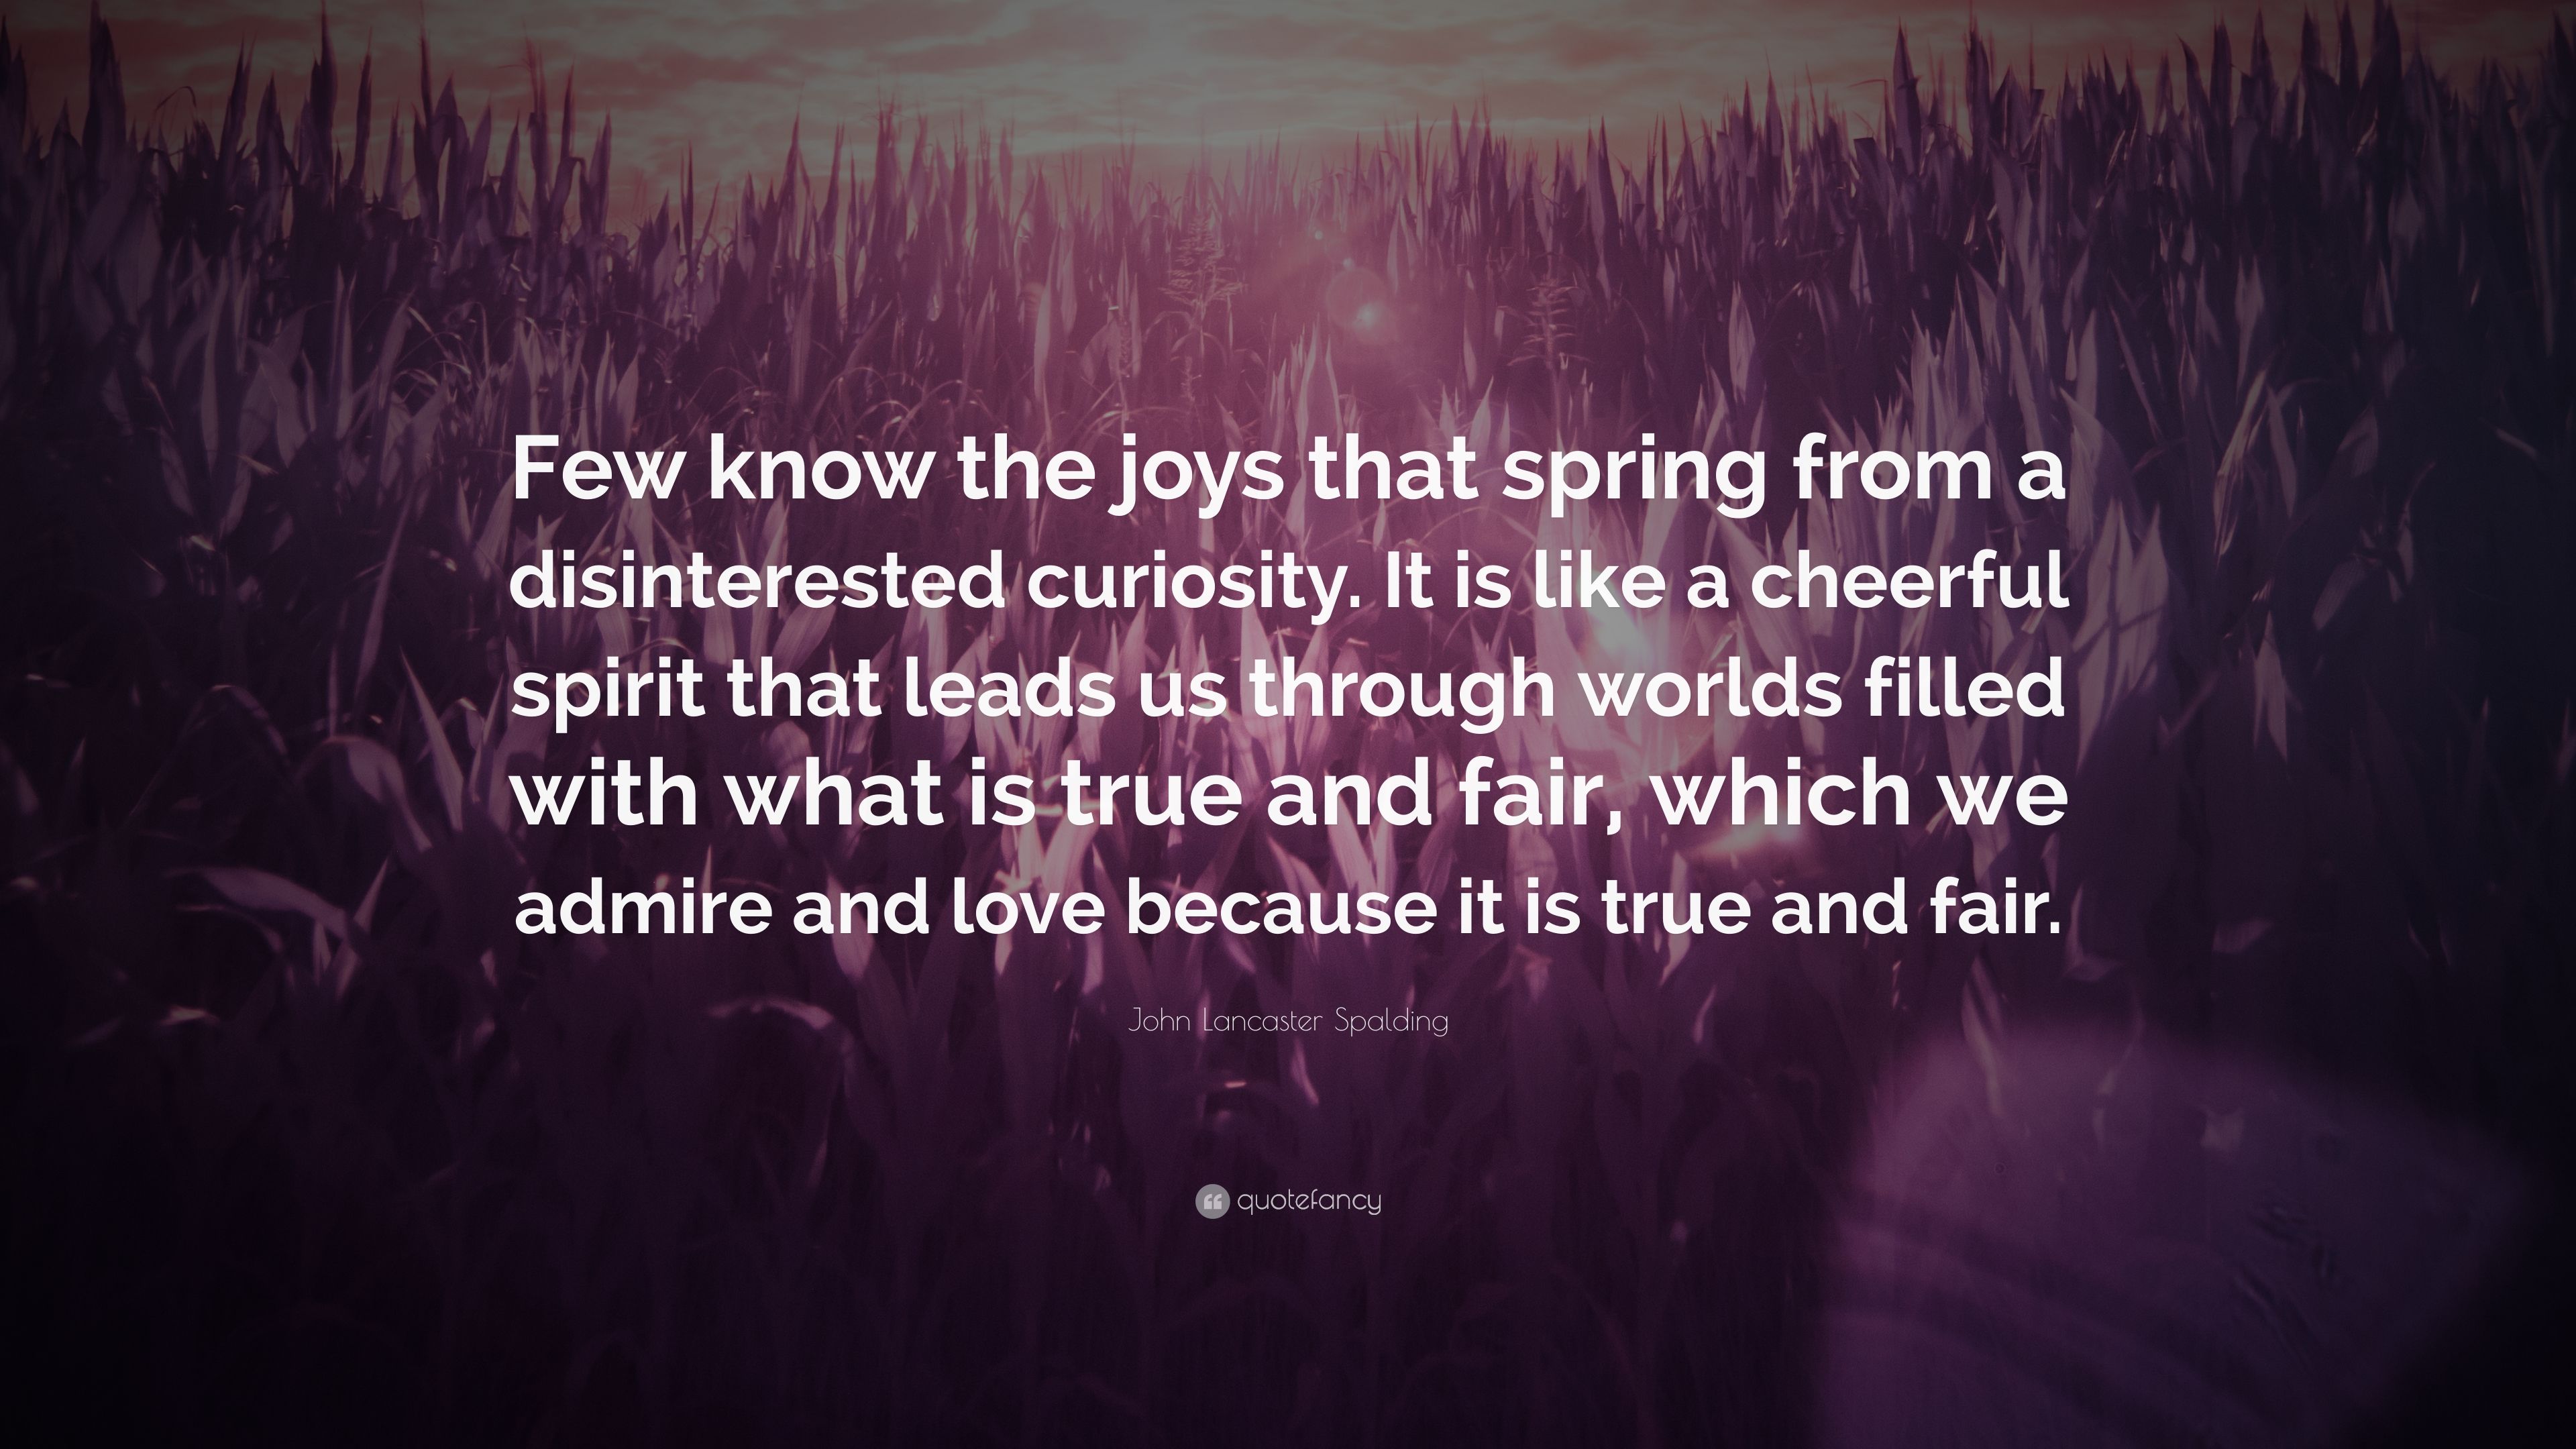 John Lancaster Spalding Quote: “Few know the joys that spring